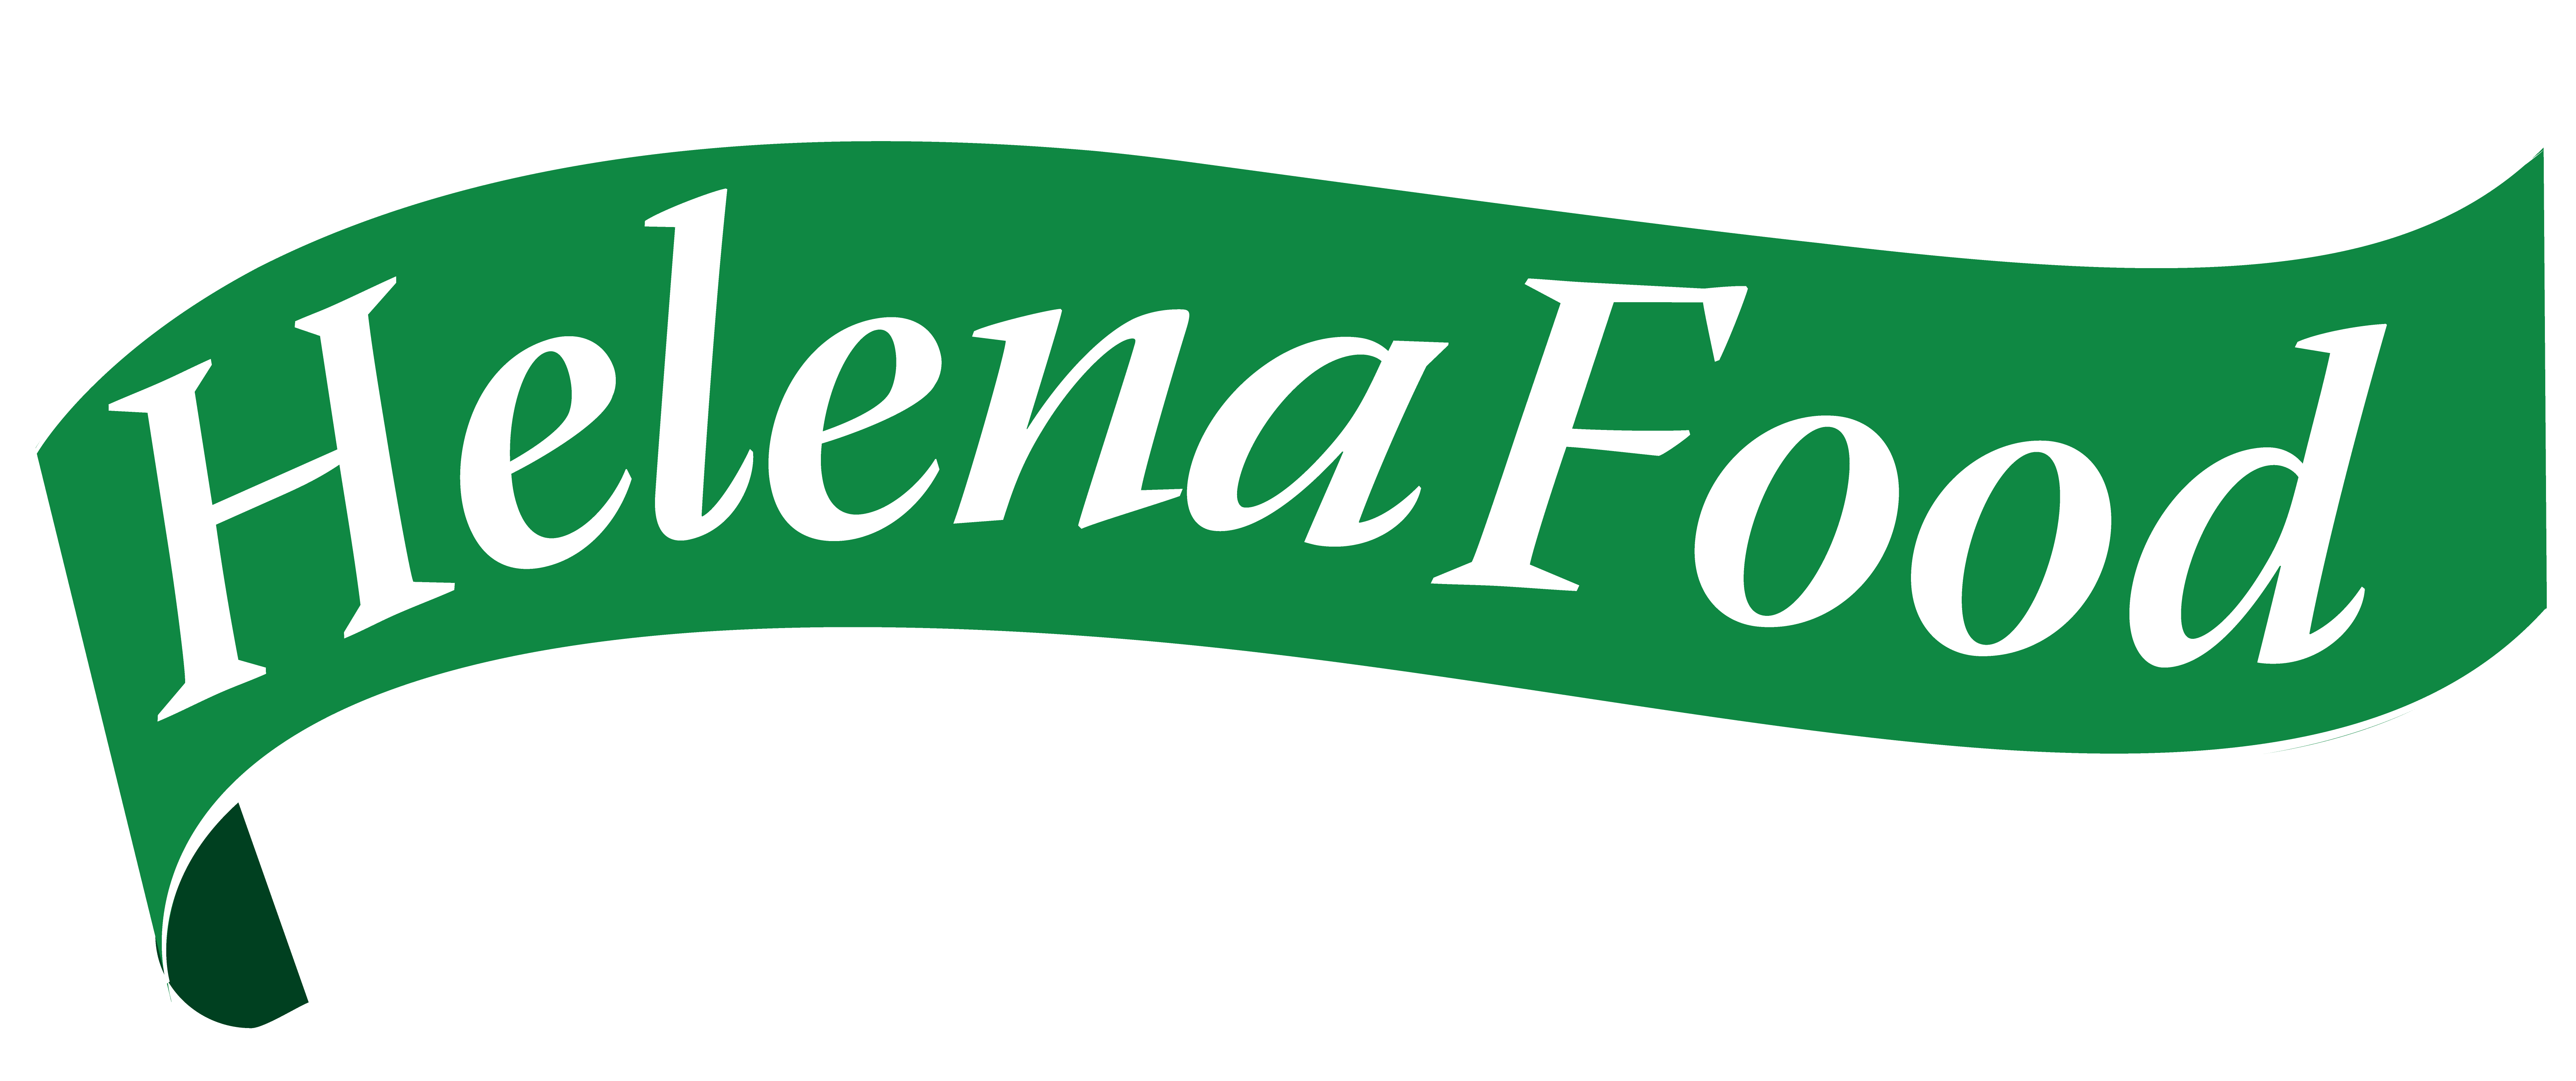 helenafood official store